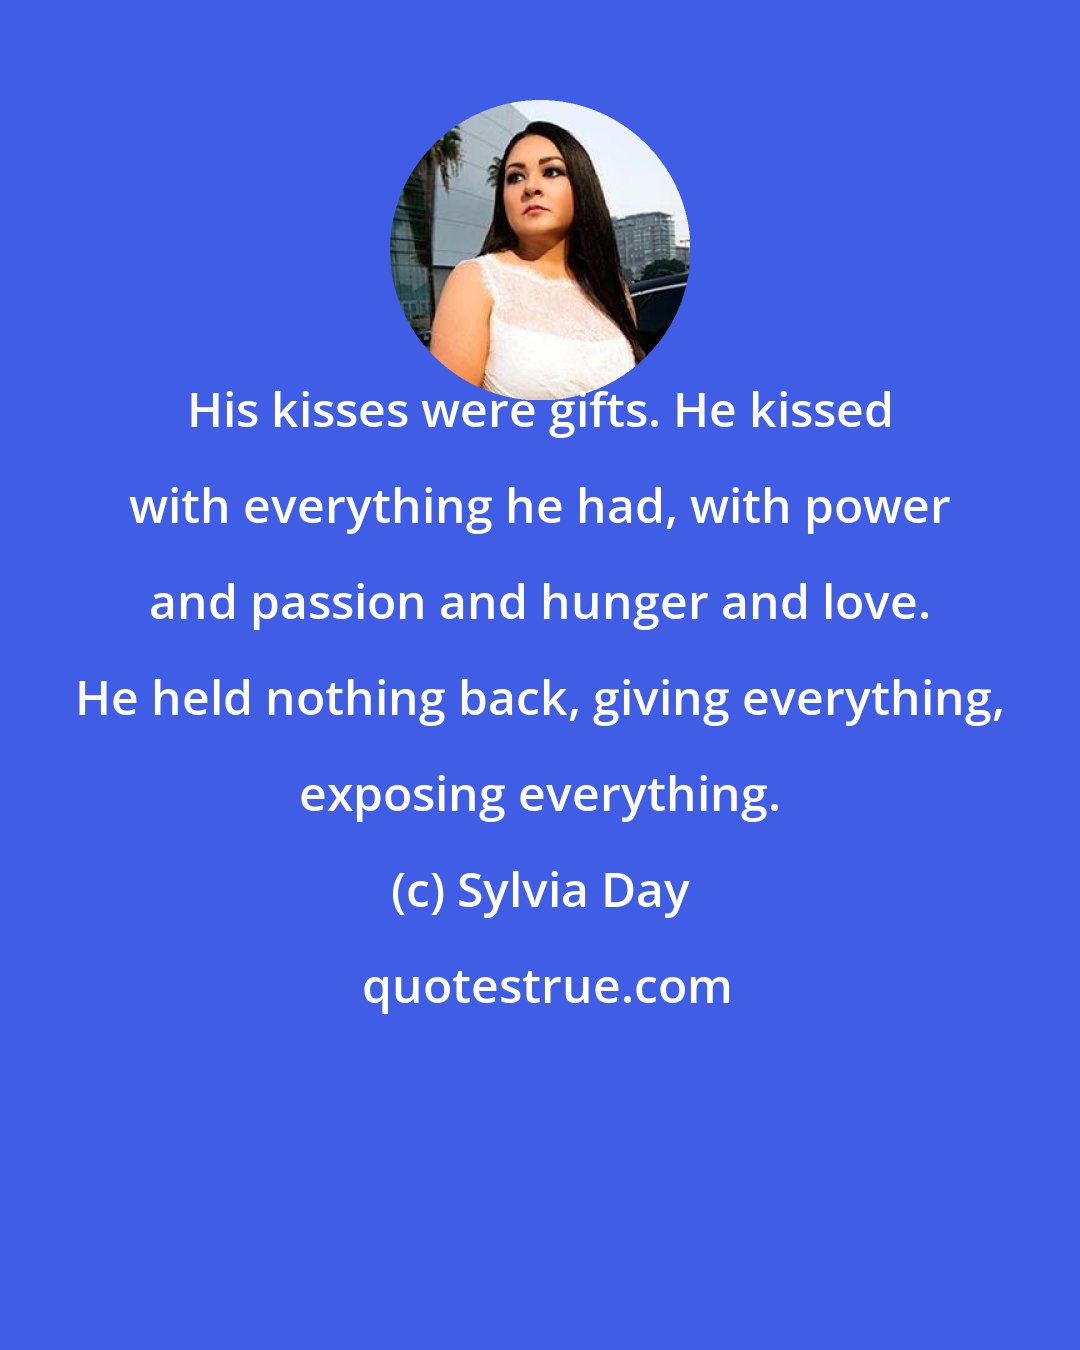 Sylvia Day: His kisses were gifts. He kissed with everything he had, with power and passion and hunger and love. He held nothing back, giving everything, exposing everything.